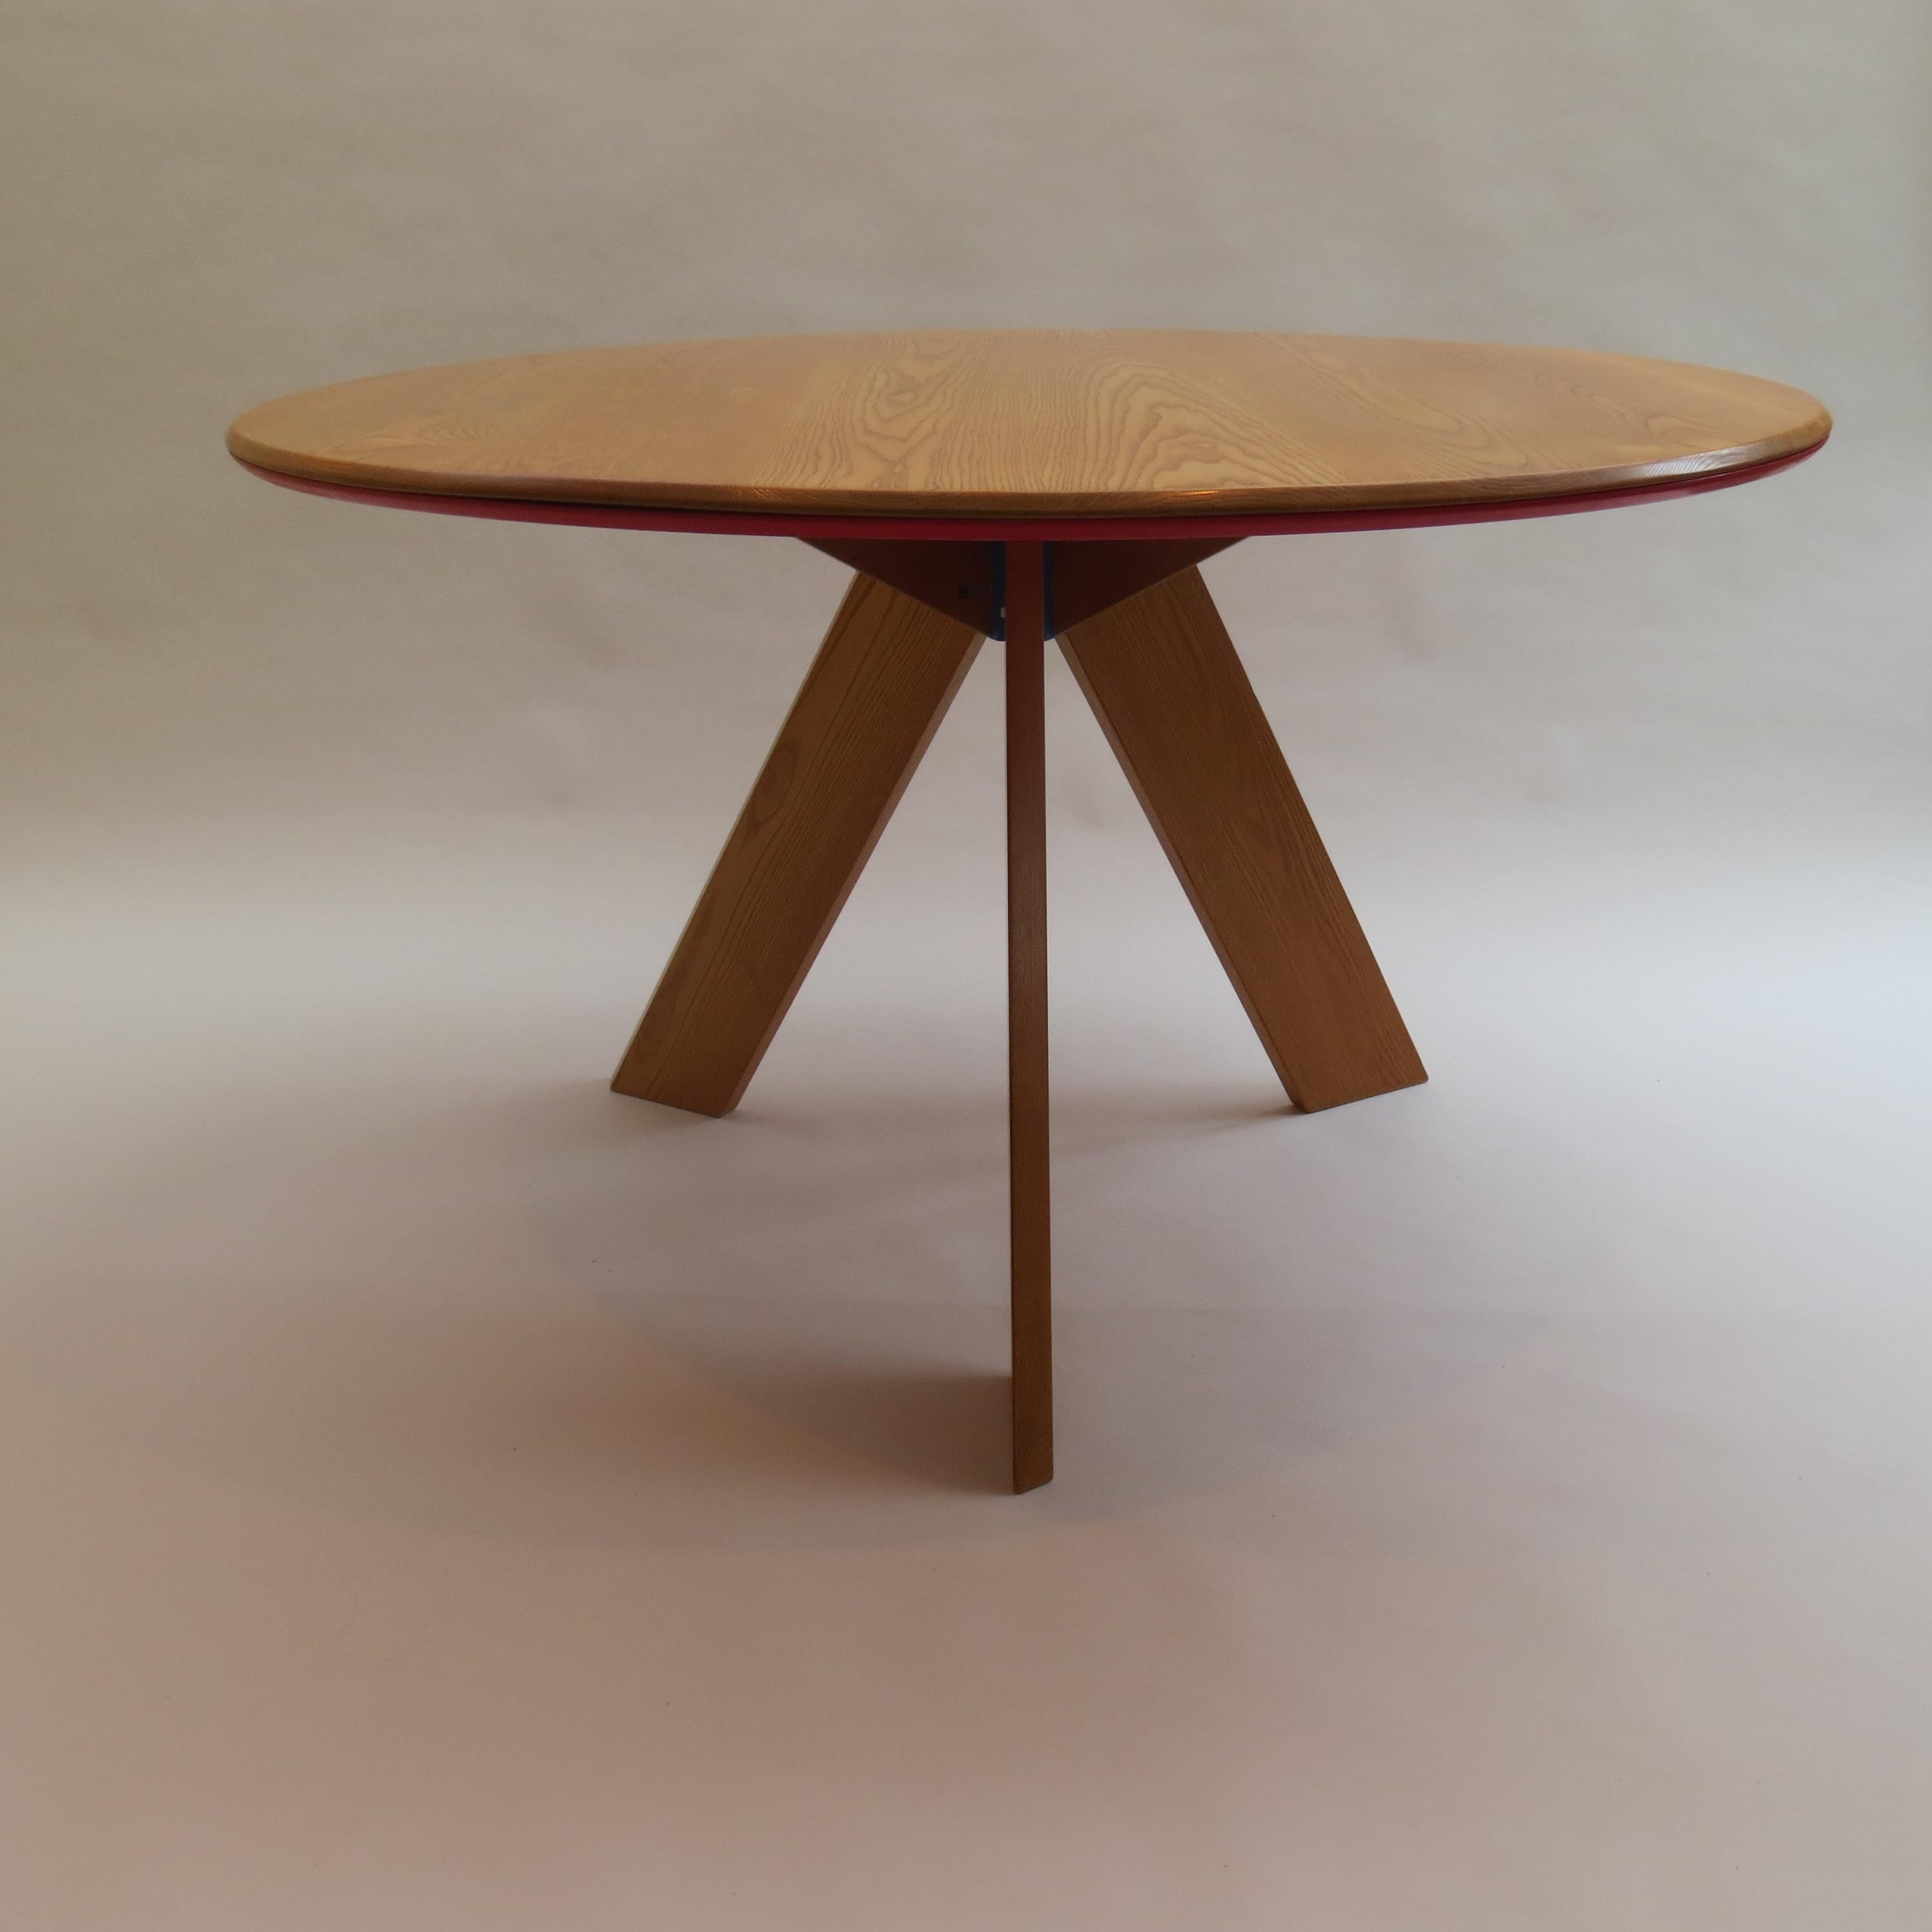 A very nicely detailed and good quality round dining table designed and produced by David Field. Bespoke made in solid ash base with blue aluminium Bose on the underside. The solid ash circular top has a painted red MDF to the underside.

A very